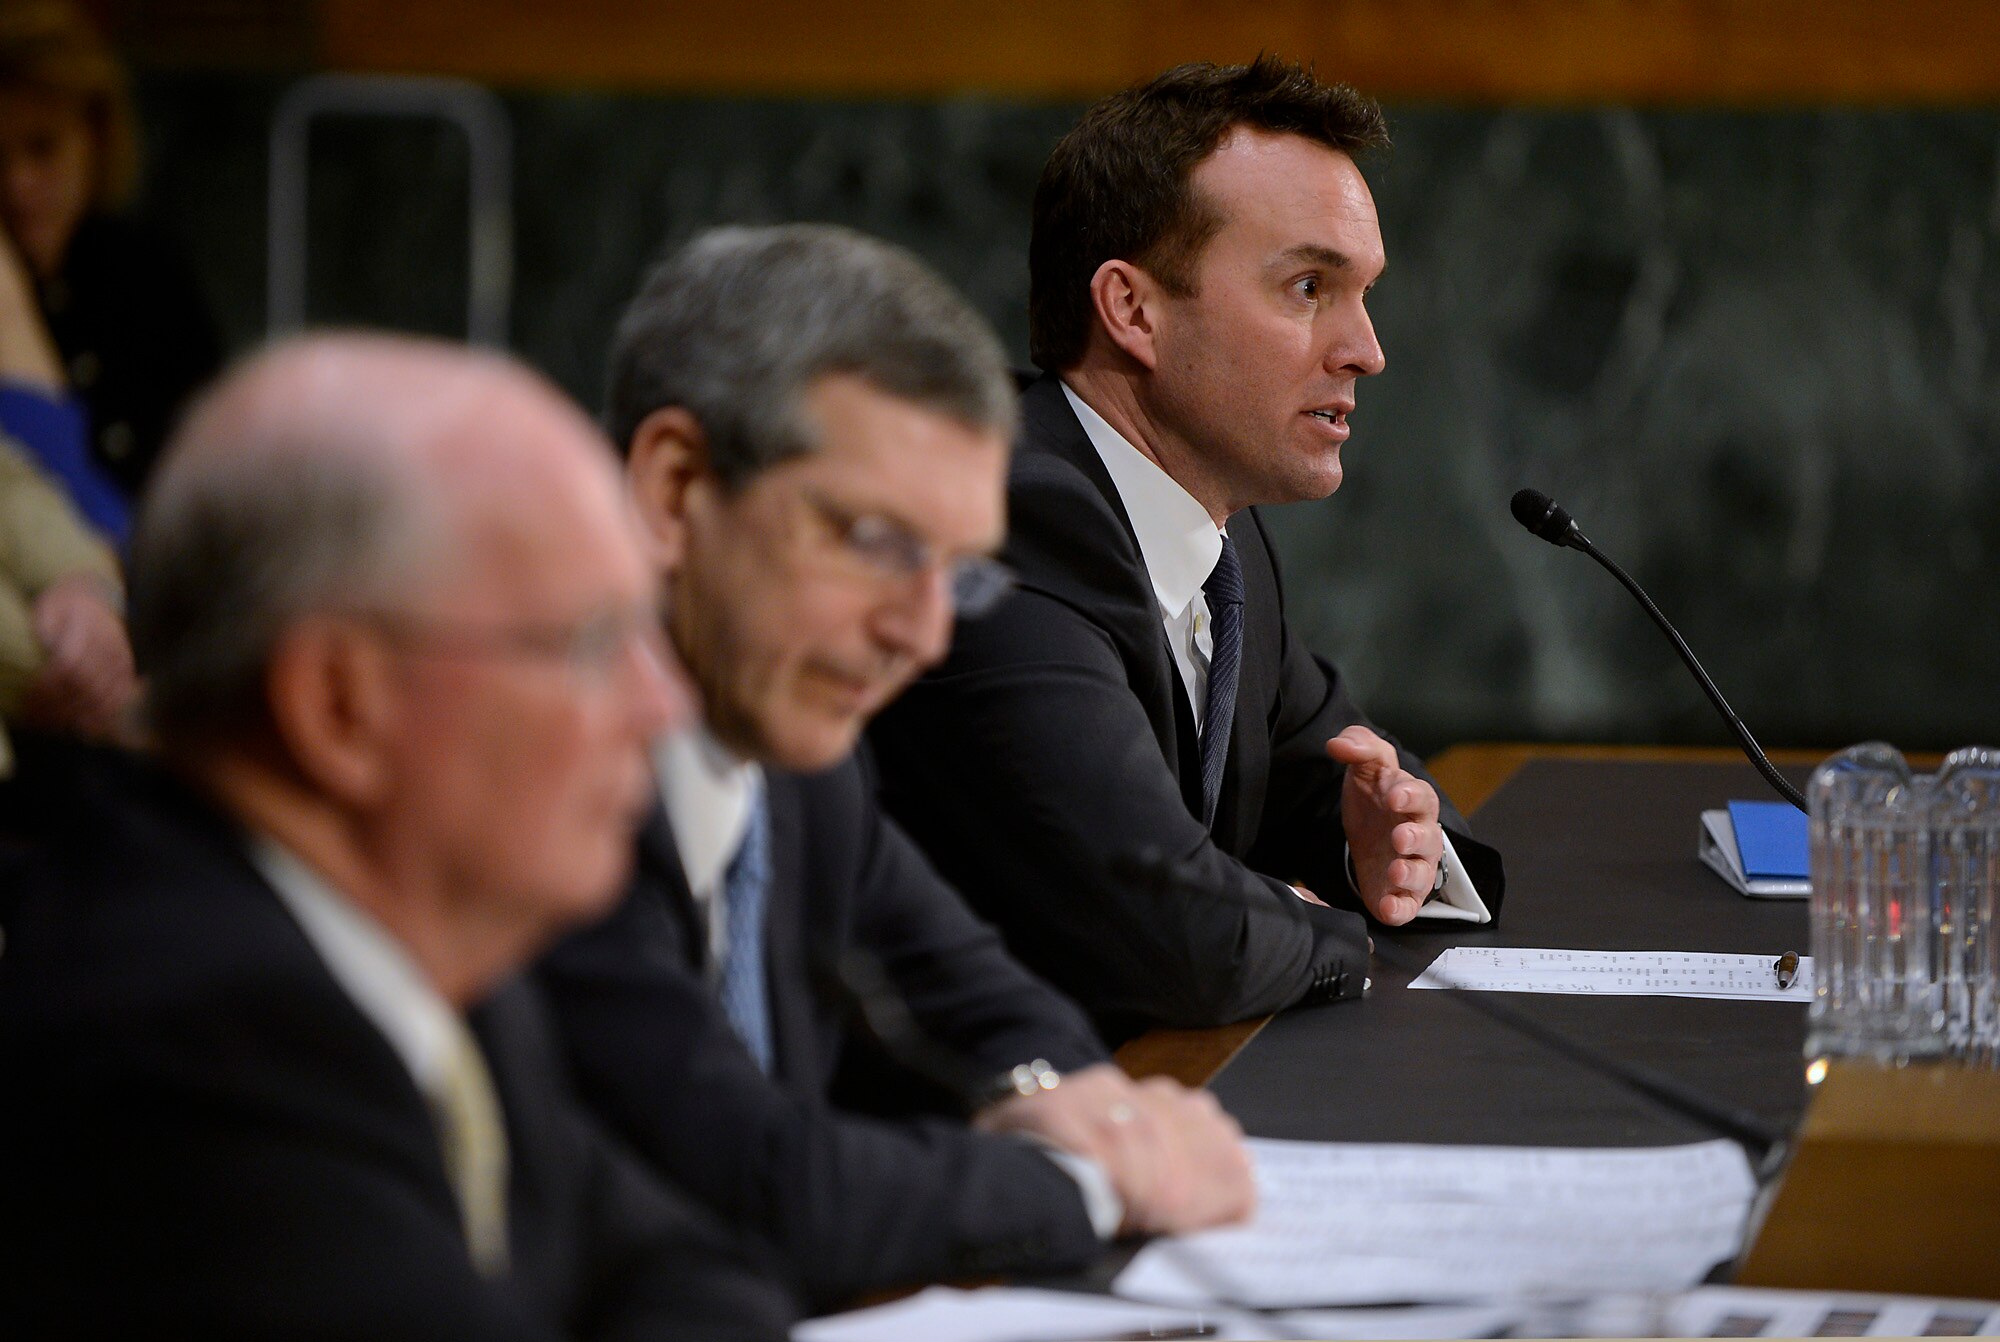 Eric Fanning, deputy under secretary of the Navy, testifies before the Senate Armed Services Committee in Washington, D.C., Feb. 28, 2013, as part of the confirmation process to serve as the under secretary of the Air Force. If confirmed, Fanning will replace Dr. Jamie Morin, who has been the Air Force’s acting under secretary since July 3, 2012.  Additional witnesses before the committee were Alan Estevez, who is nominated to be the principal deputy under secretary of defense for acquisition, technology and logistics; and Frederick Vollrath, who is nominated to be the assistant secretary of defense for readiness and force management. (U.S. Air Force photo/Scott M. Ash)